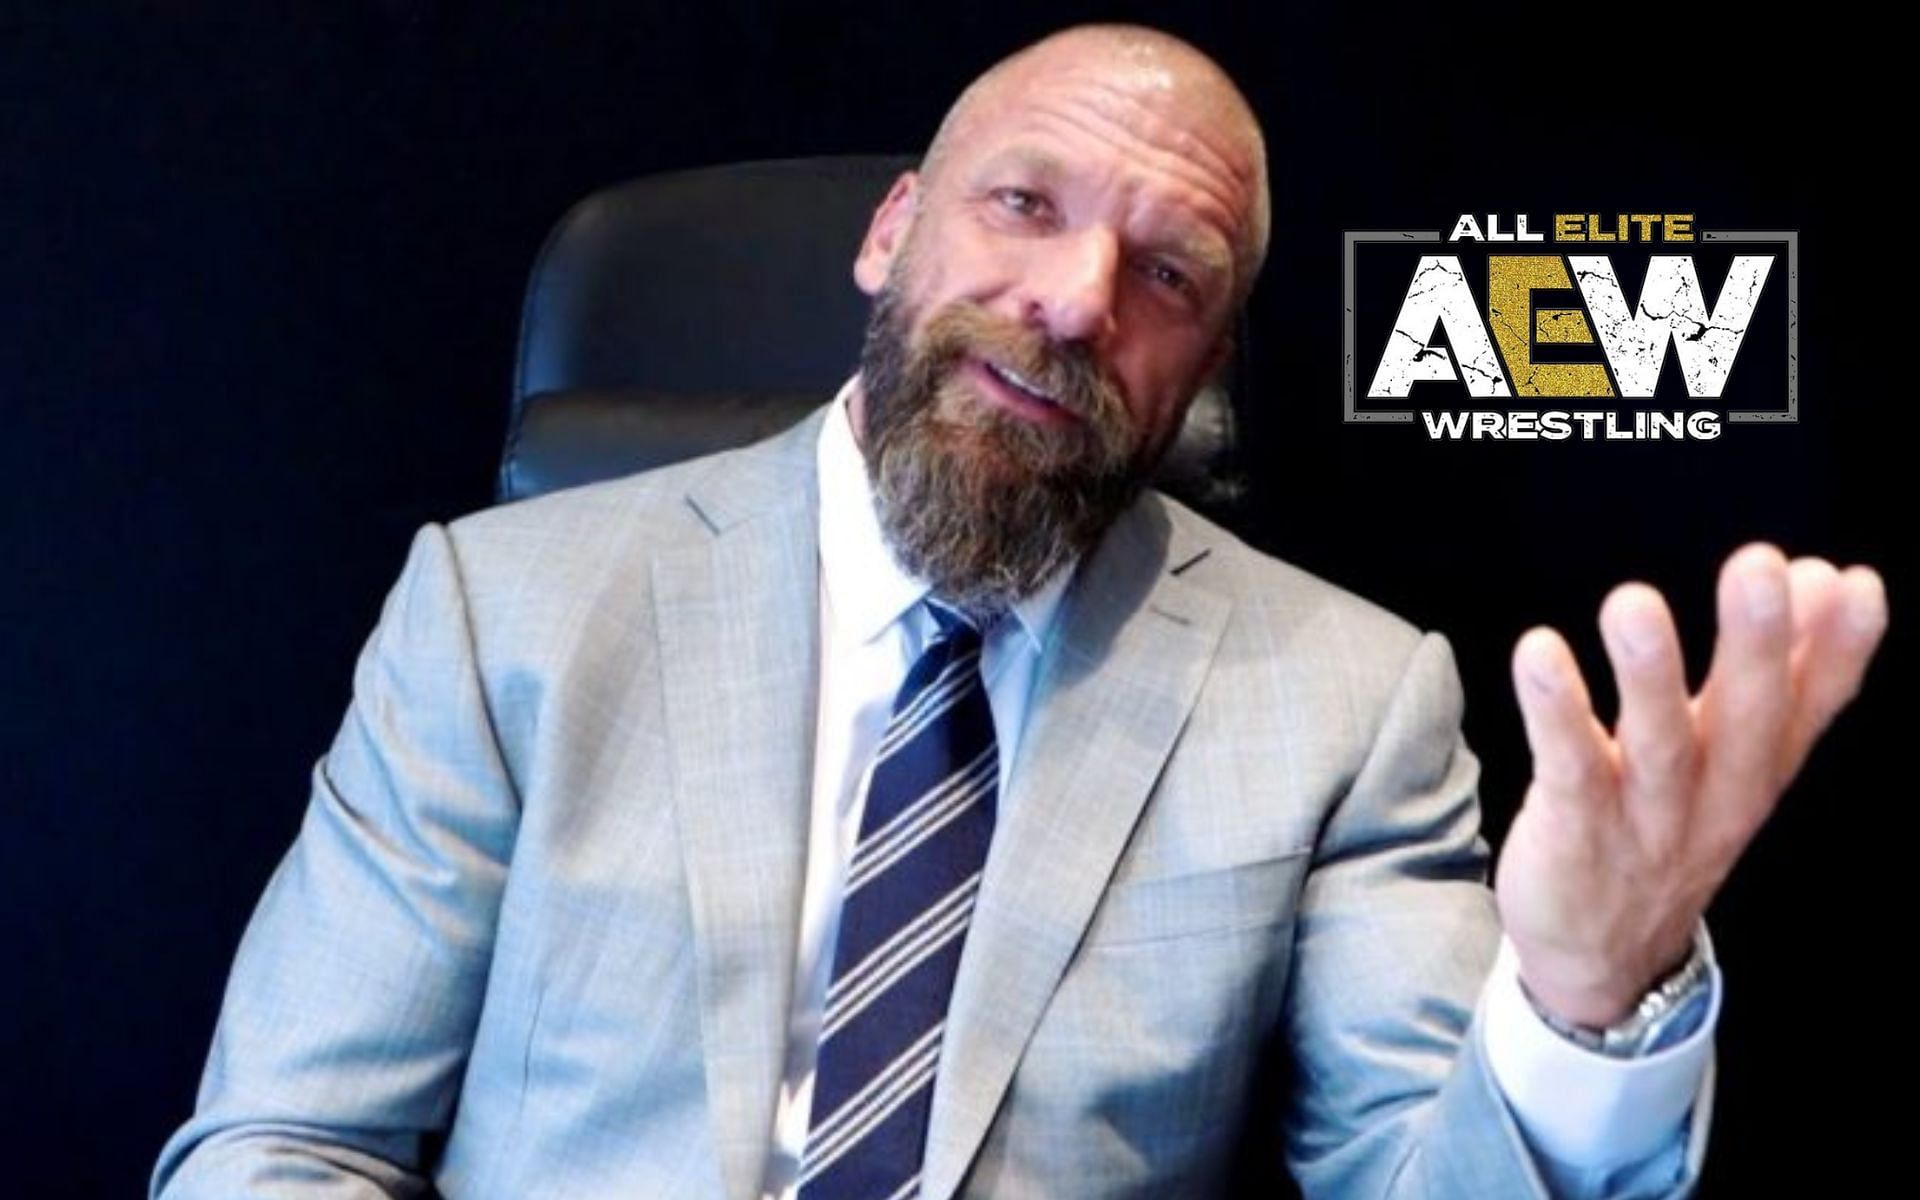 This AEW star could potentially return to the Triple H-led WWE.